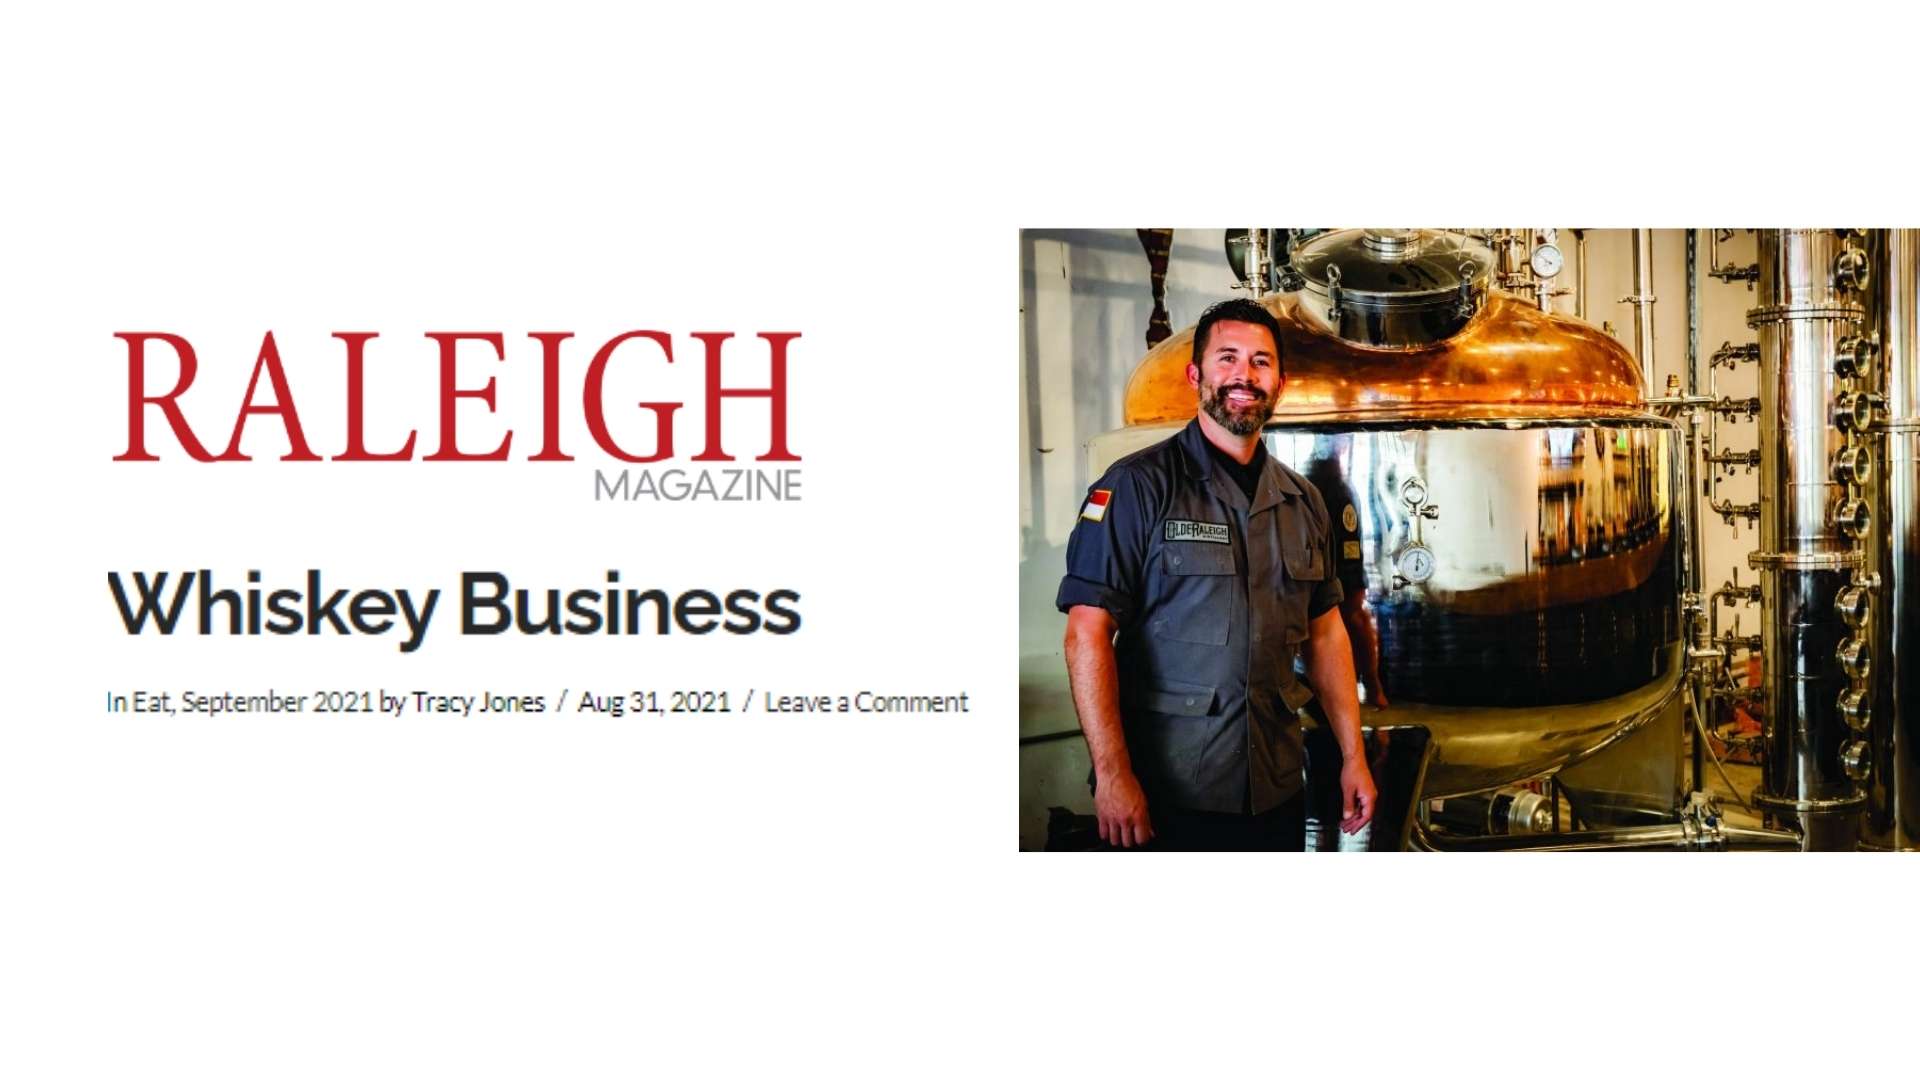 Olde Raleigh Distillery feature in raleigh magazine